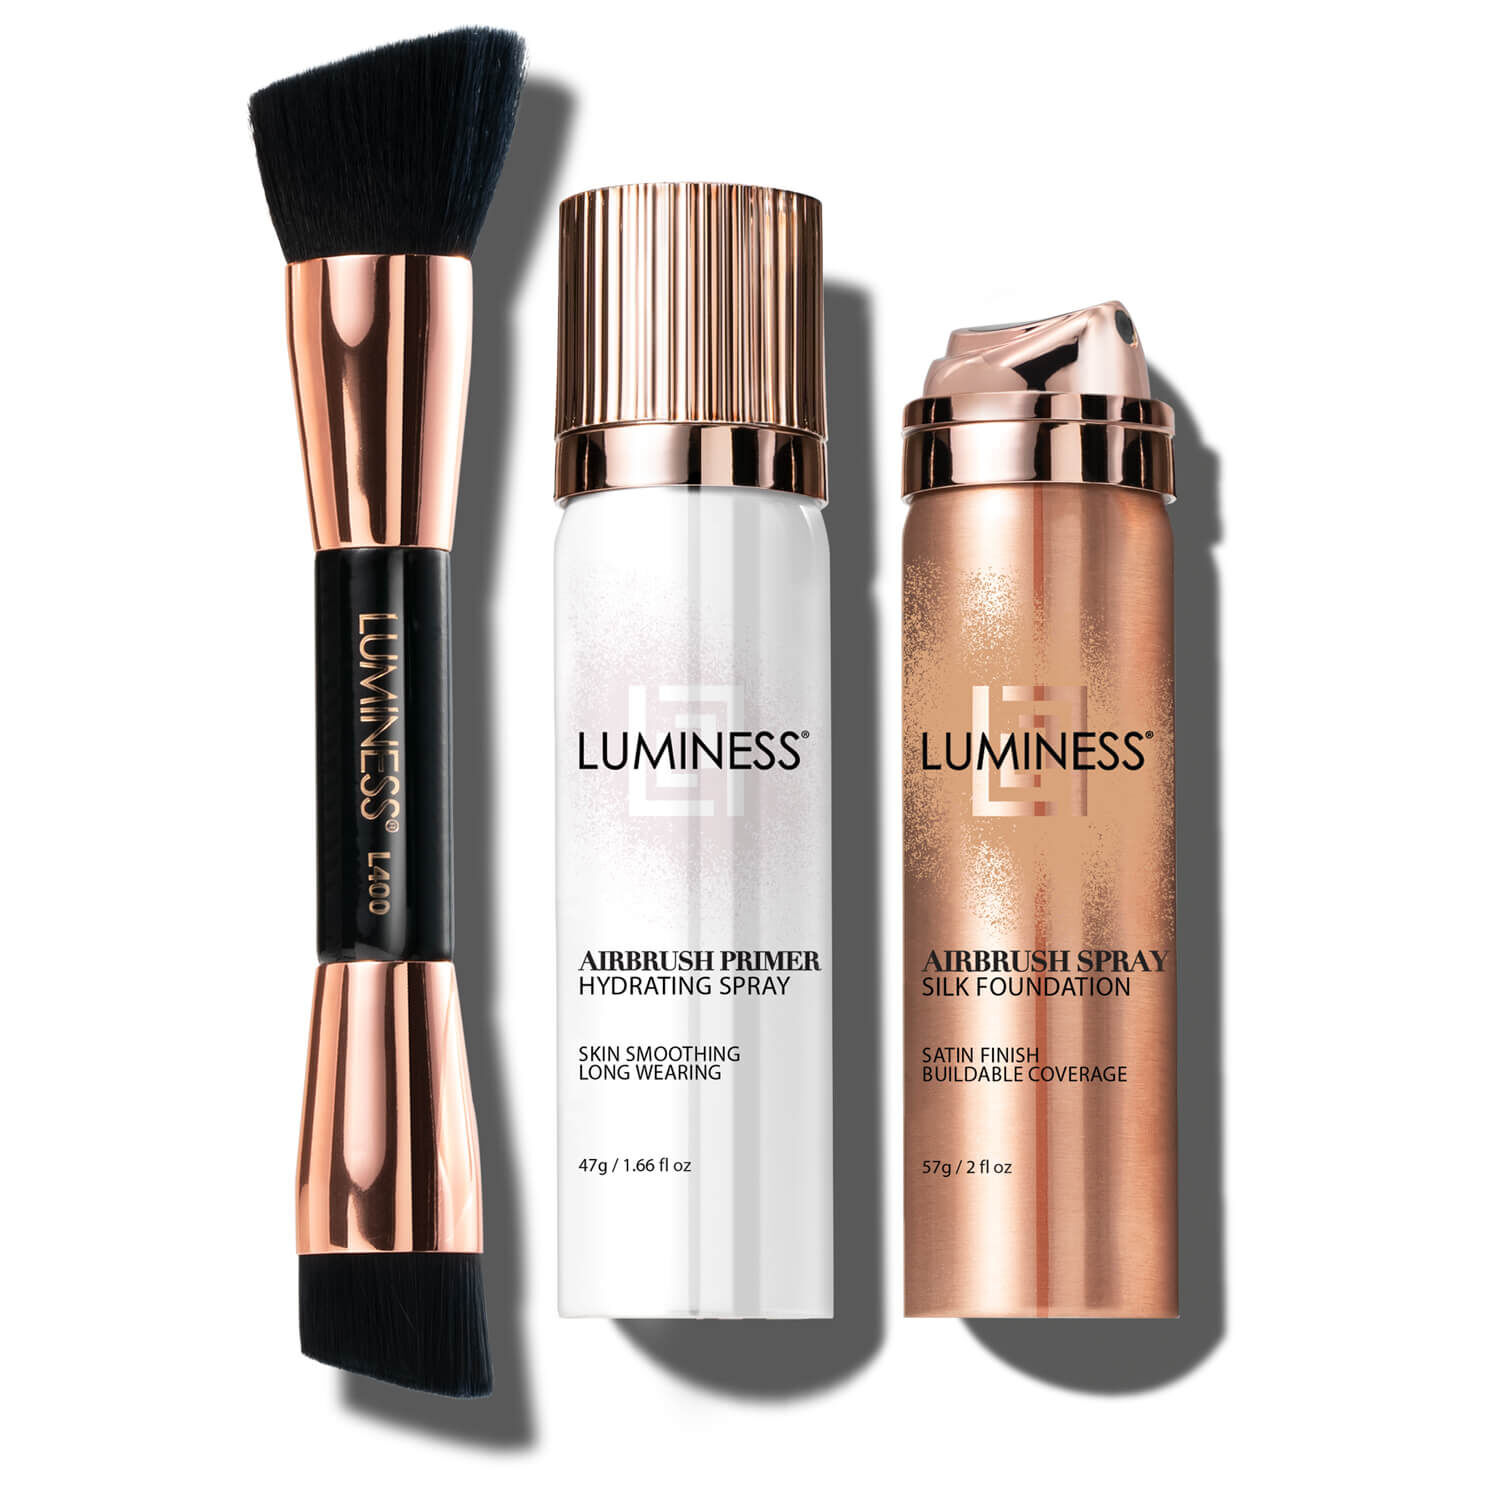  Luminess Air Silk 4-In-1 Airbrush Foundation- Foundation,  Shade 030 (.5 Fl Oz) - Sheer to Medium Coverage - Anti-Aging Formula  Hydrates and Moisturizes - Professional Makeup Kit for Cordless Air